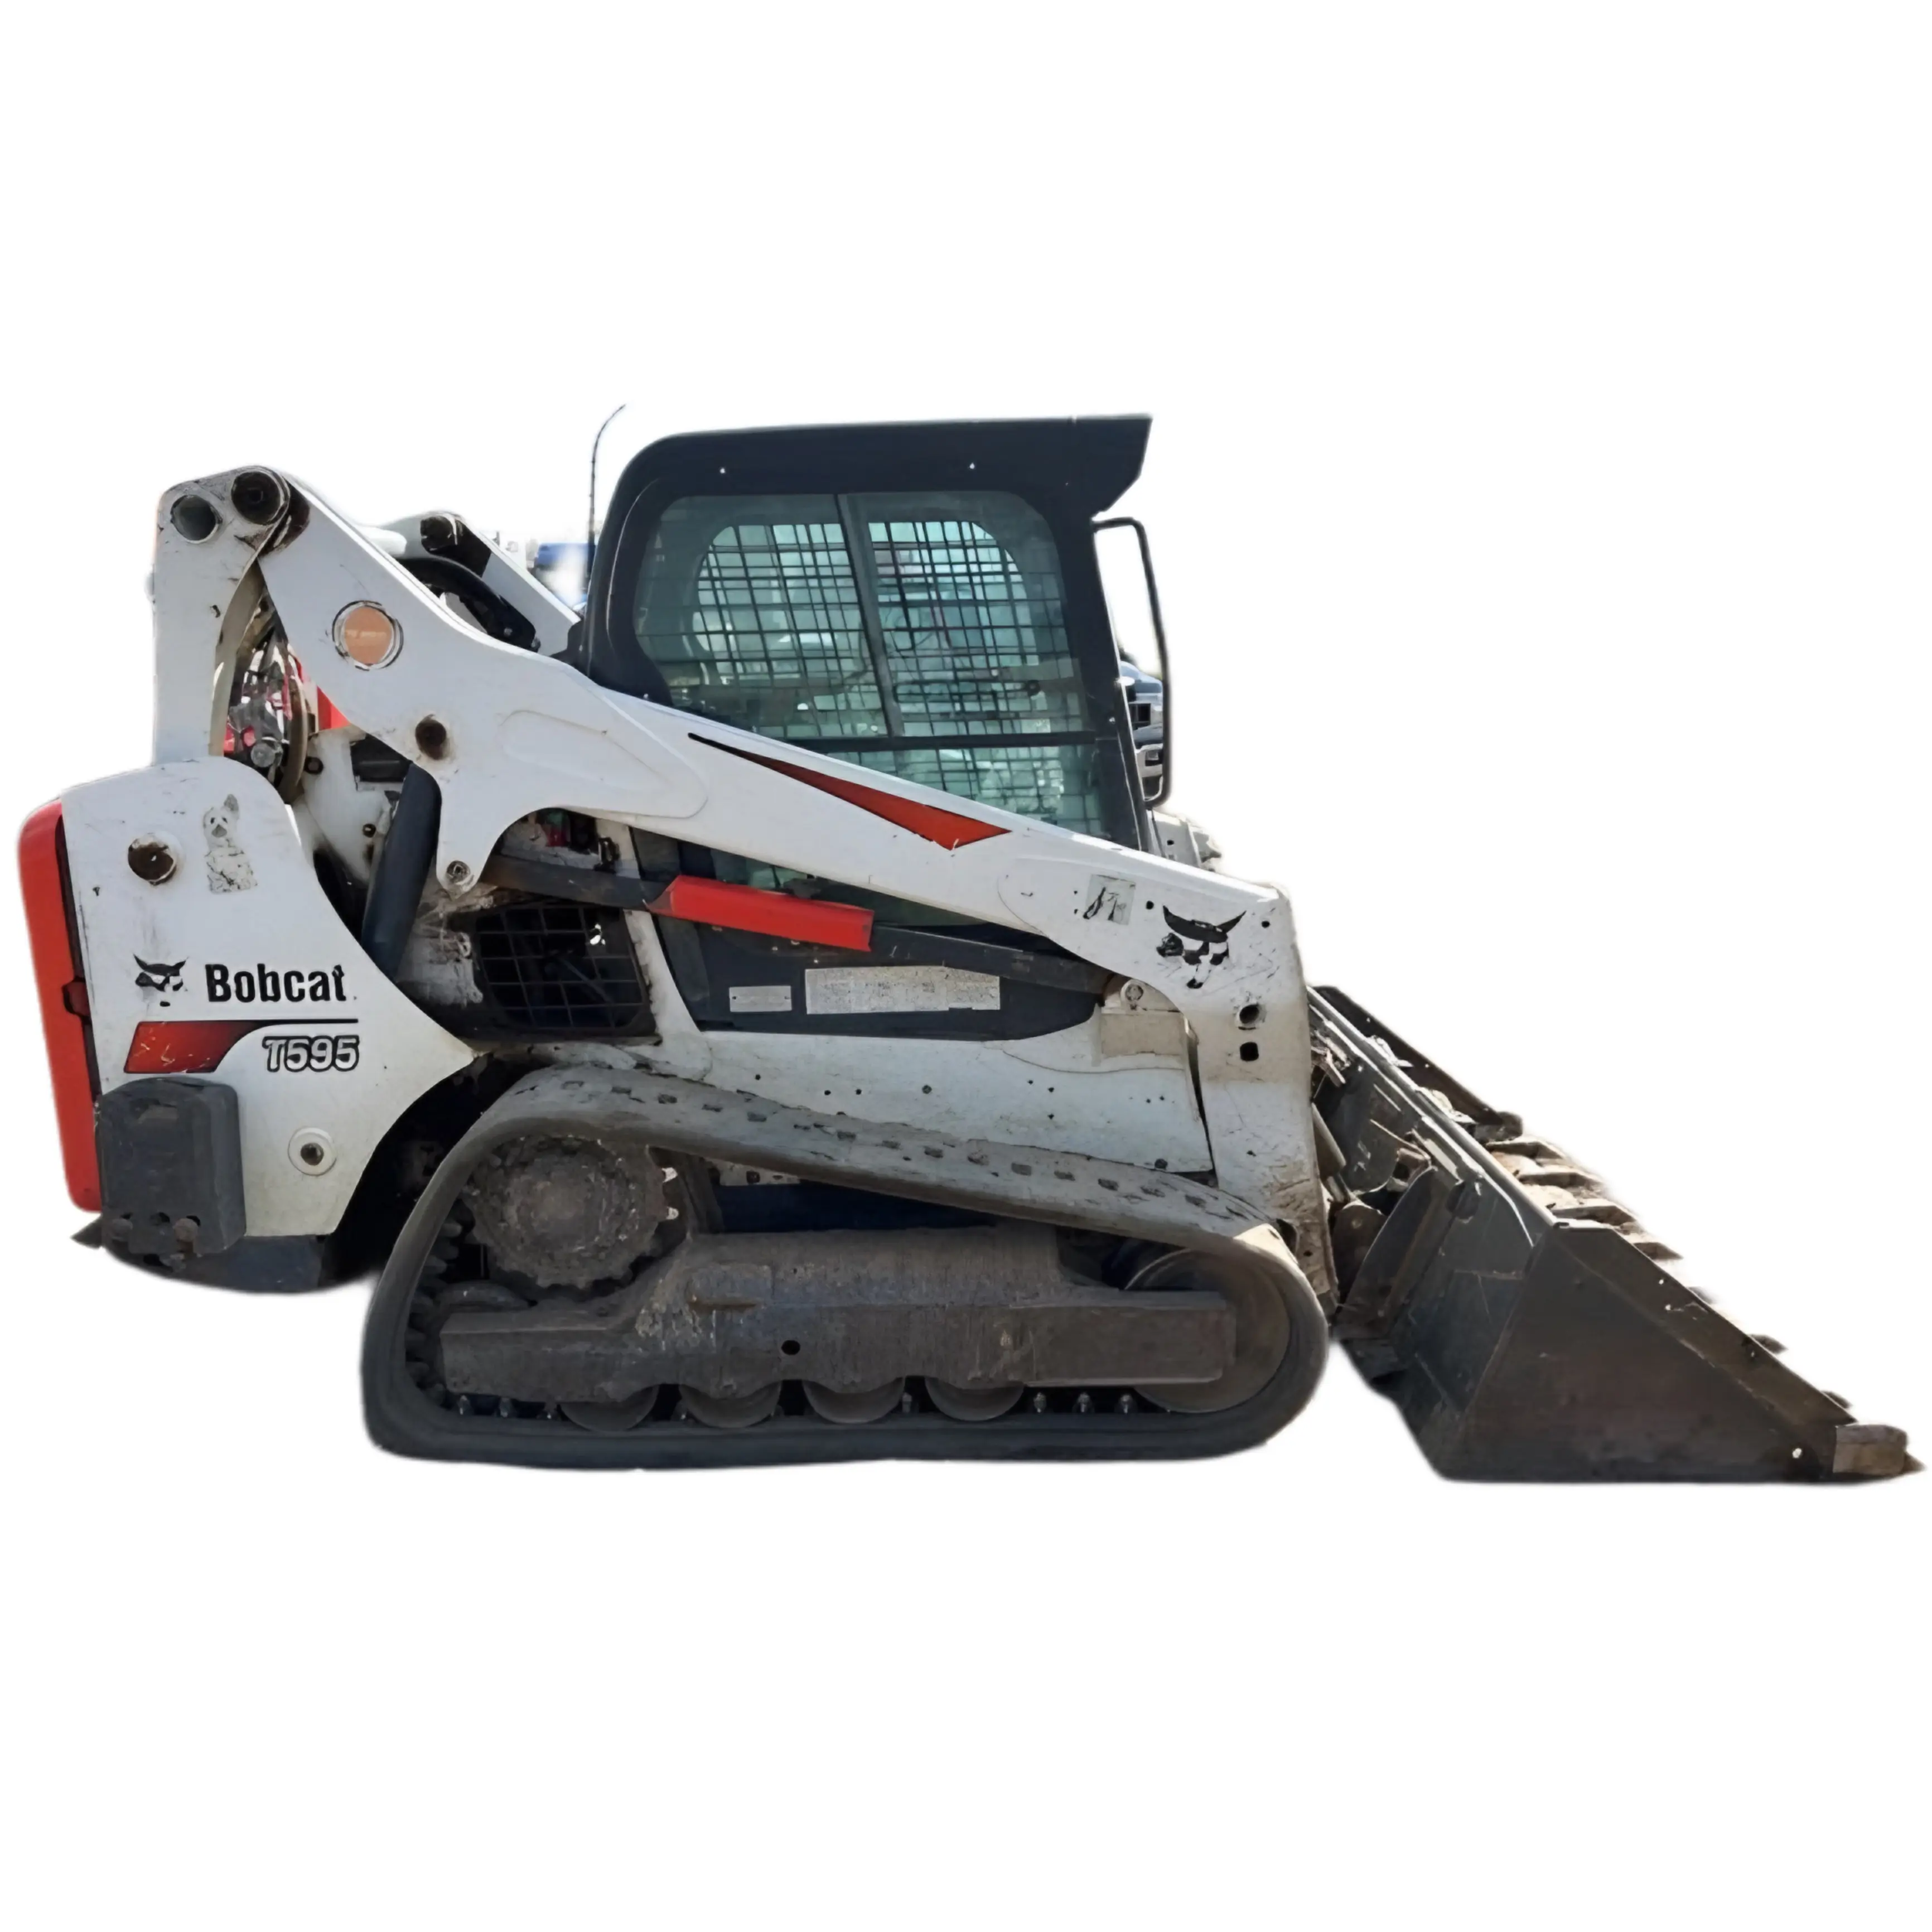 Fully Hydraulic Skid Steer EPA Approved Bobcat T595 Skid Steer Loader With Diesel Engine For Sale